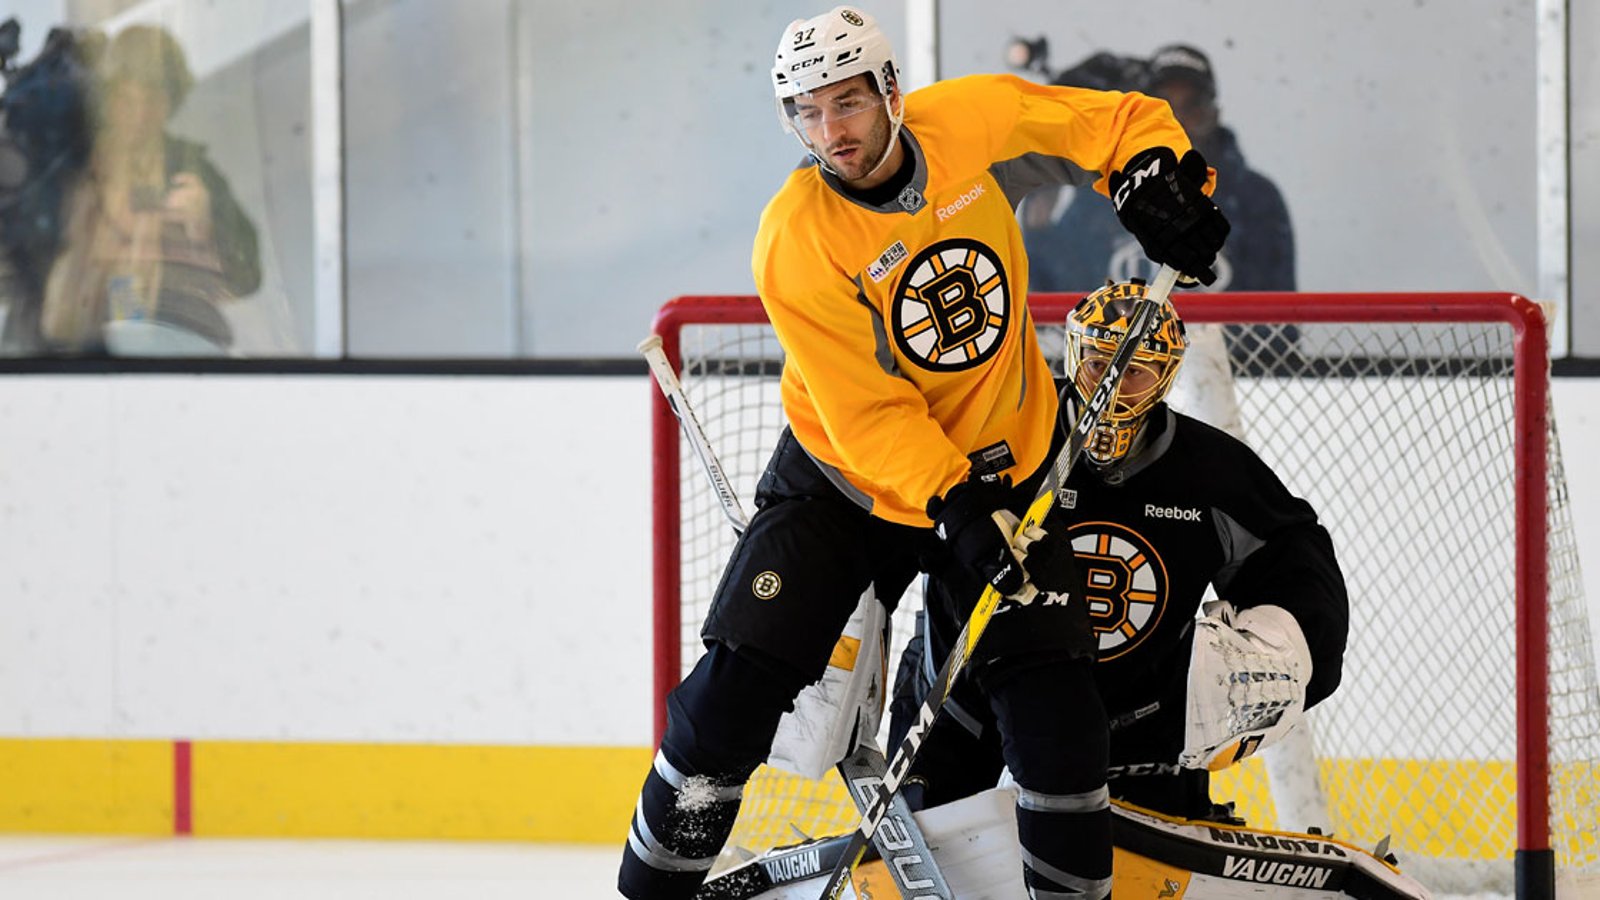 Potential disaster averted in Bruins training camp